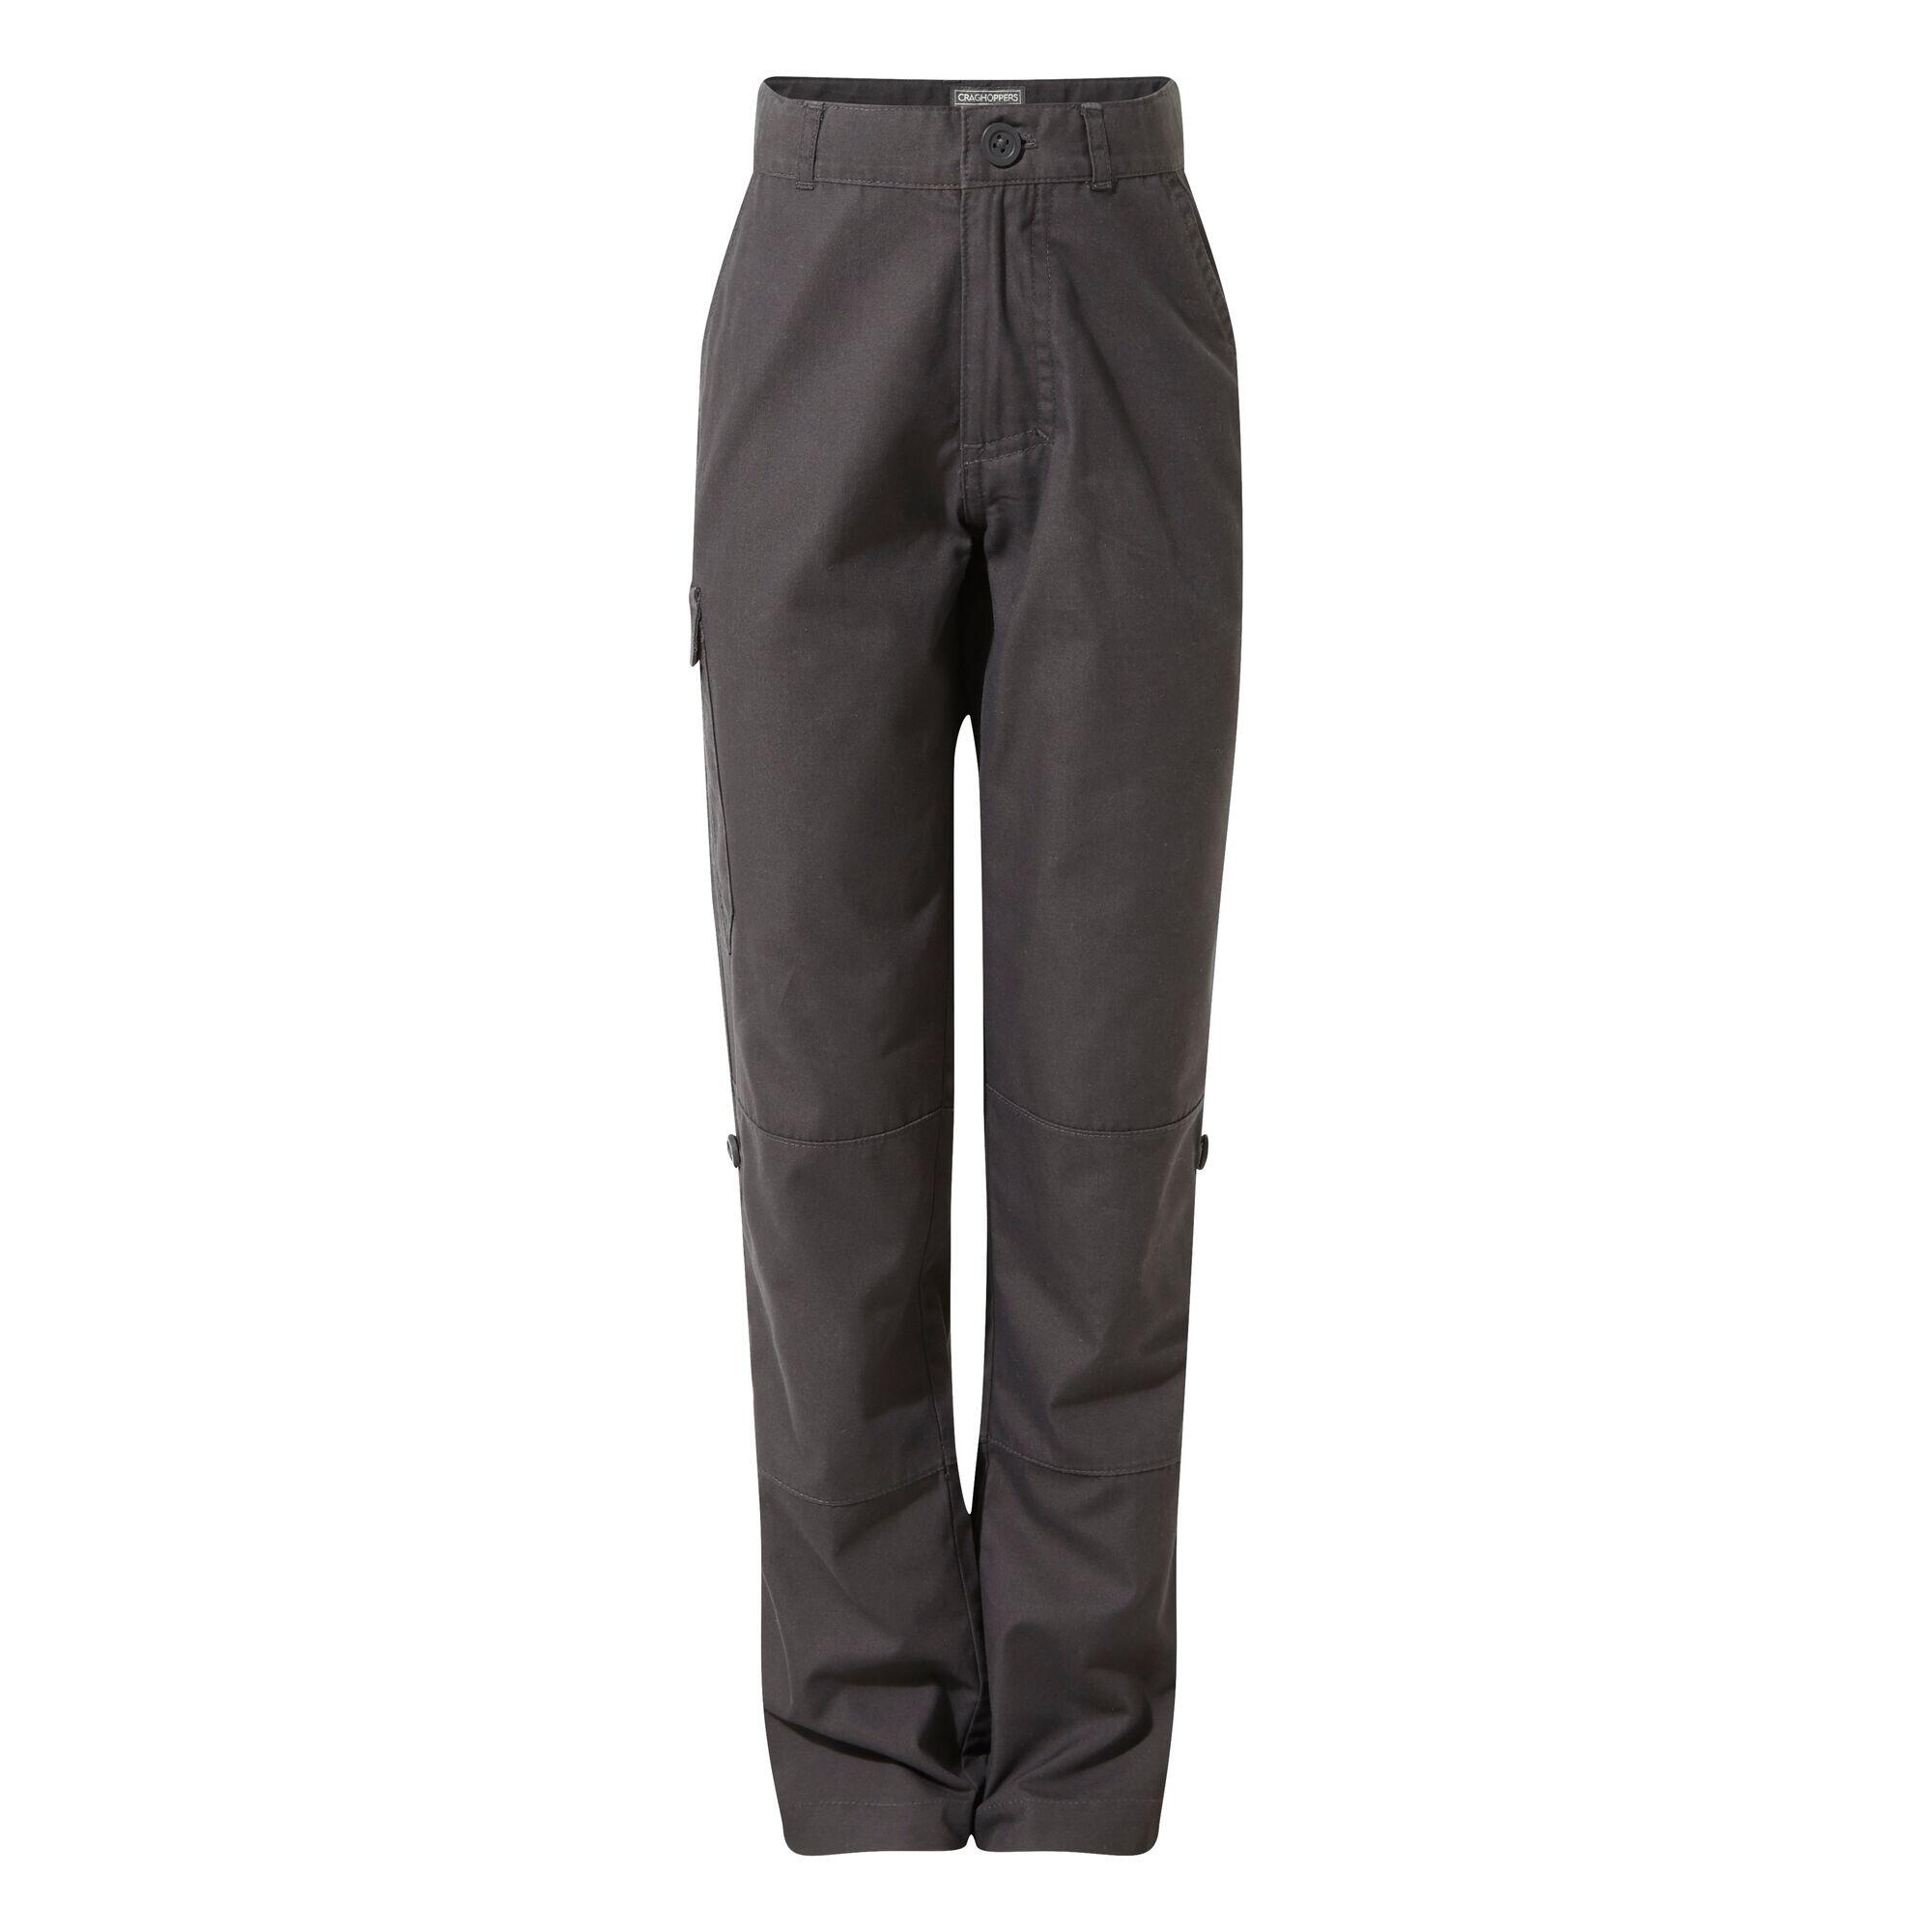 Men's Expert Kiwi Waterproof Thermo Trousers CRAGHOPPERS